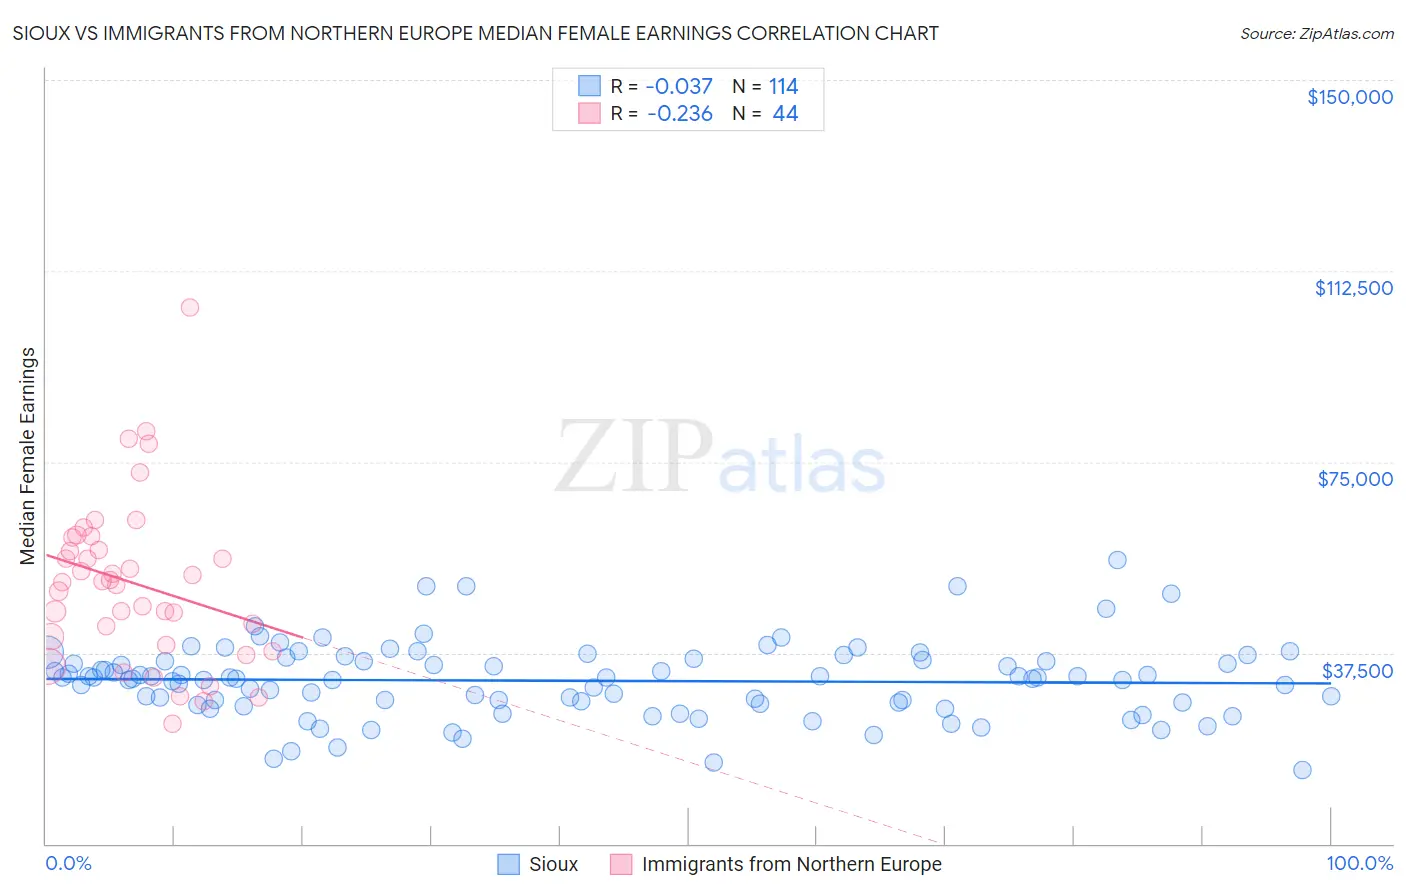 Sioux vs Immigrants from Northern Europe Median Female Earnings